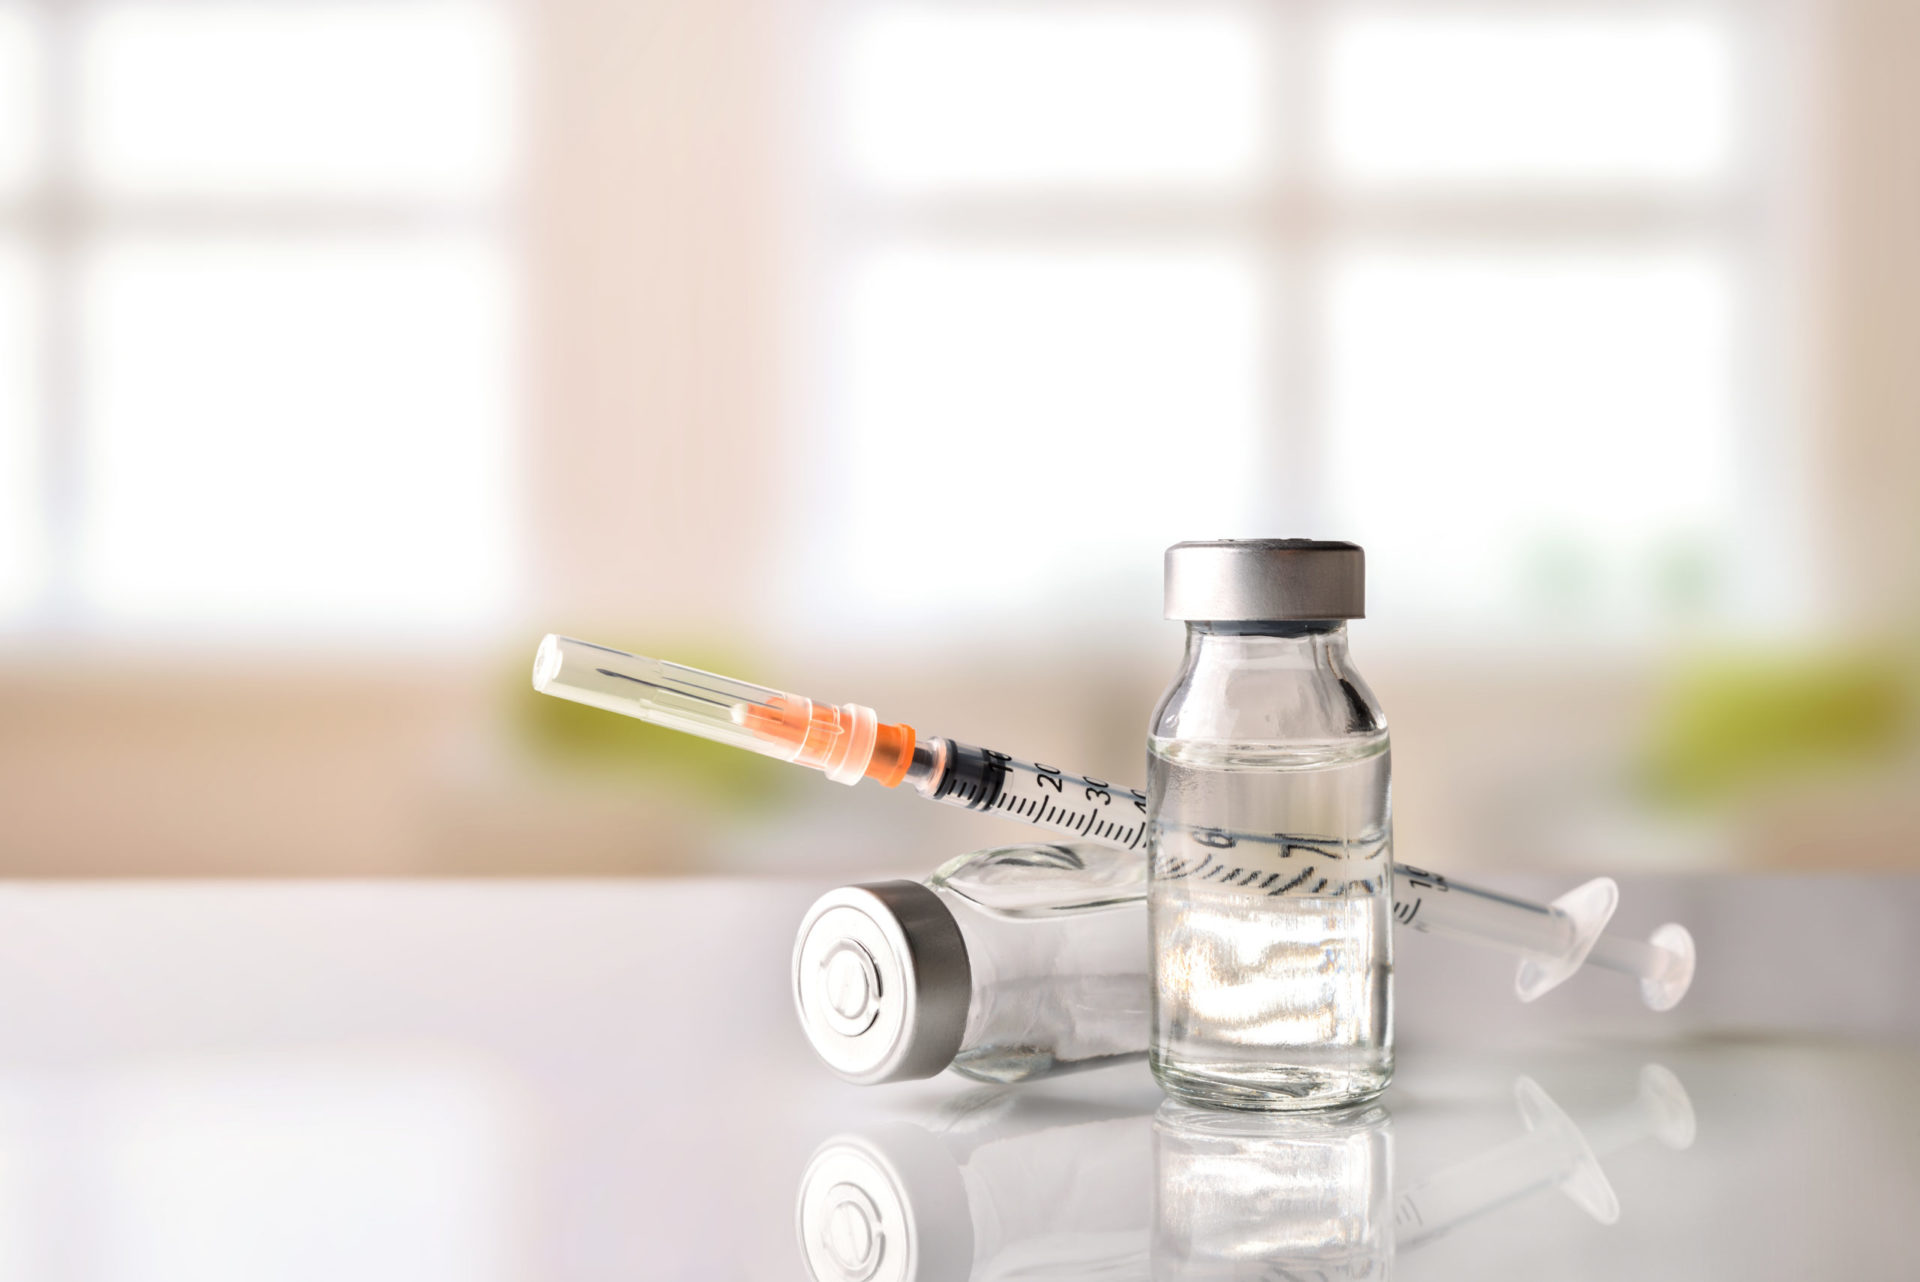 Vaccine vials and needle on a counter